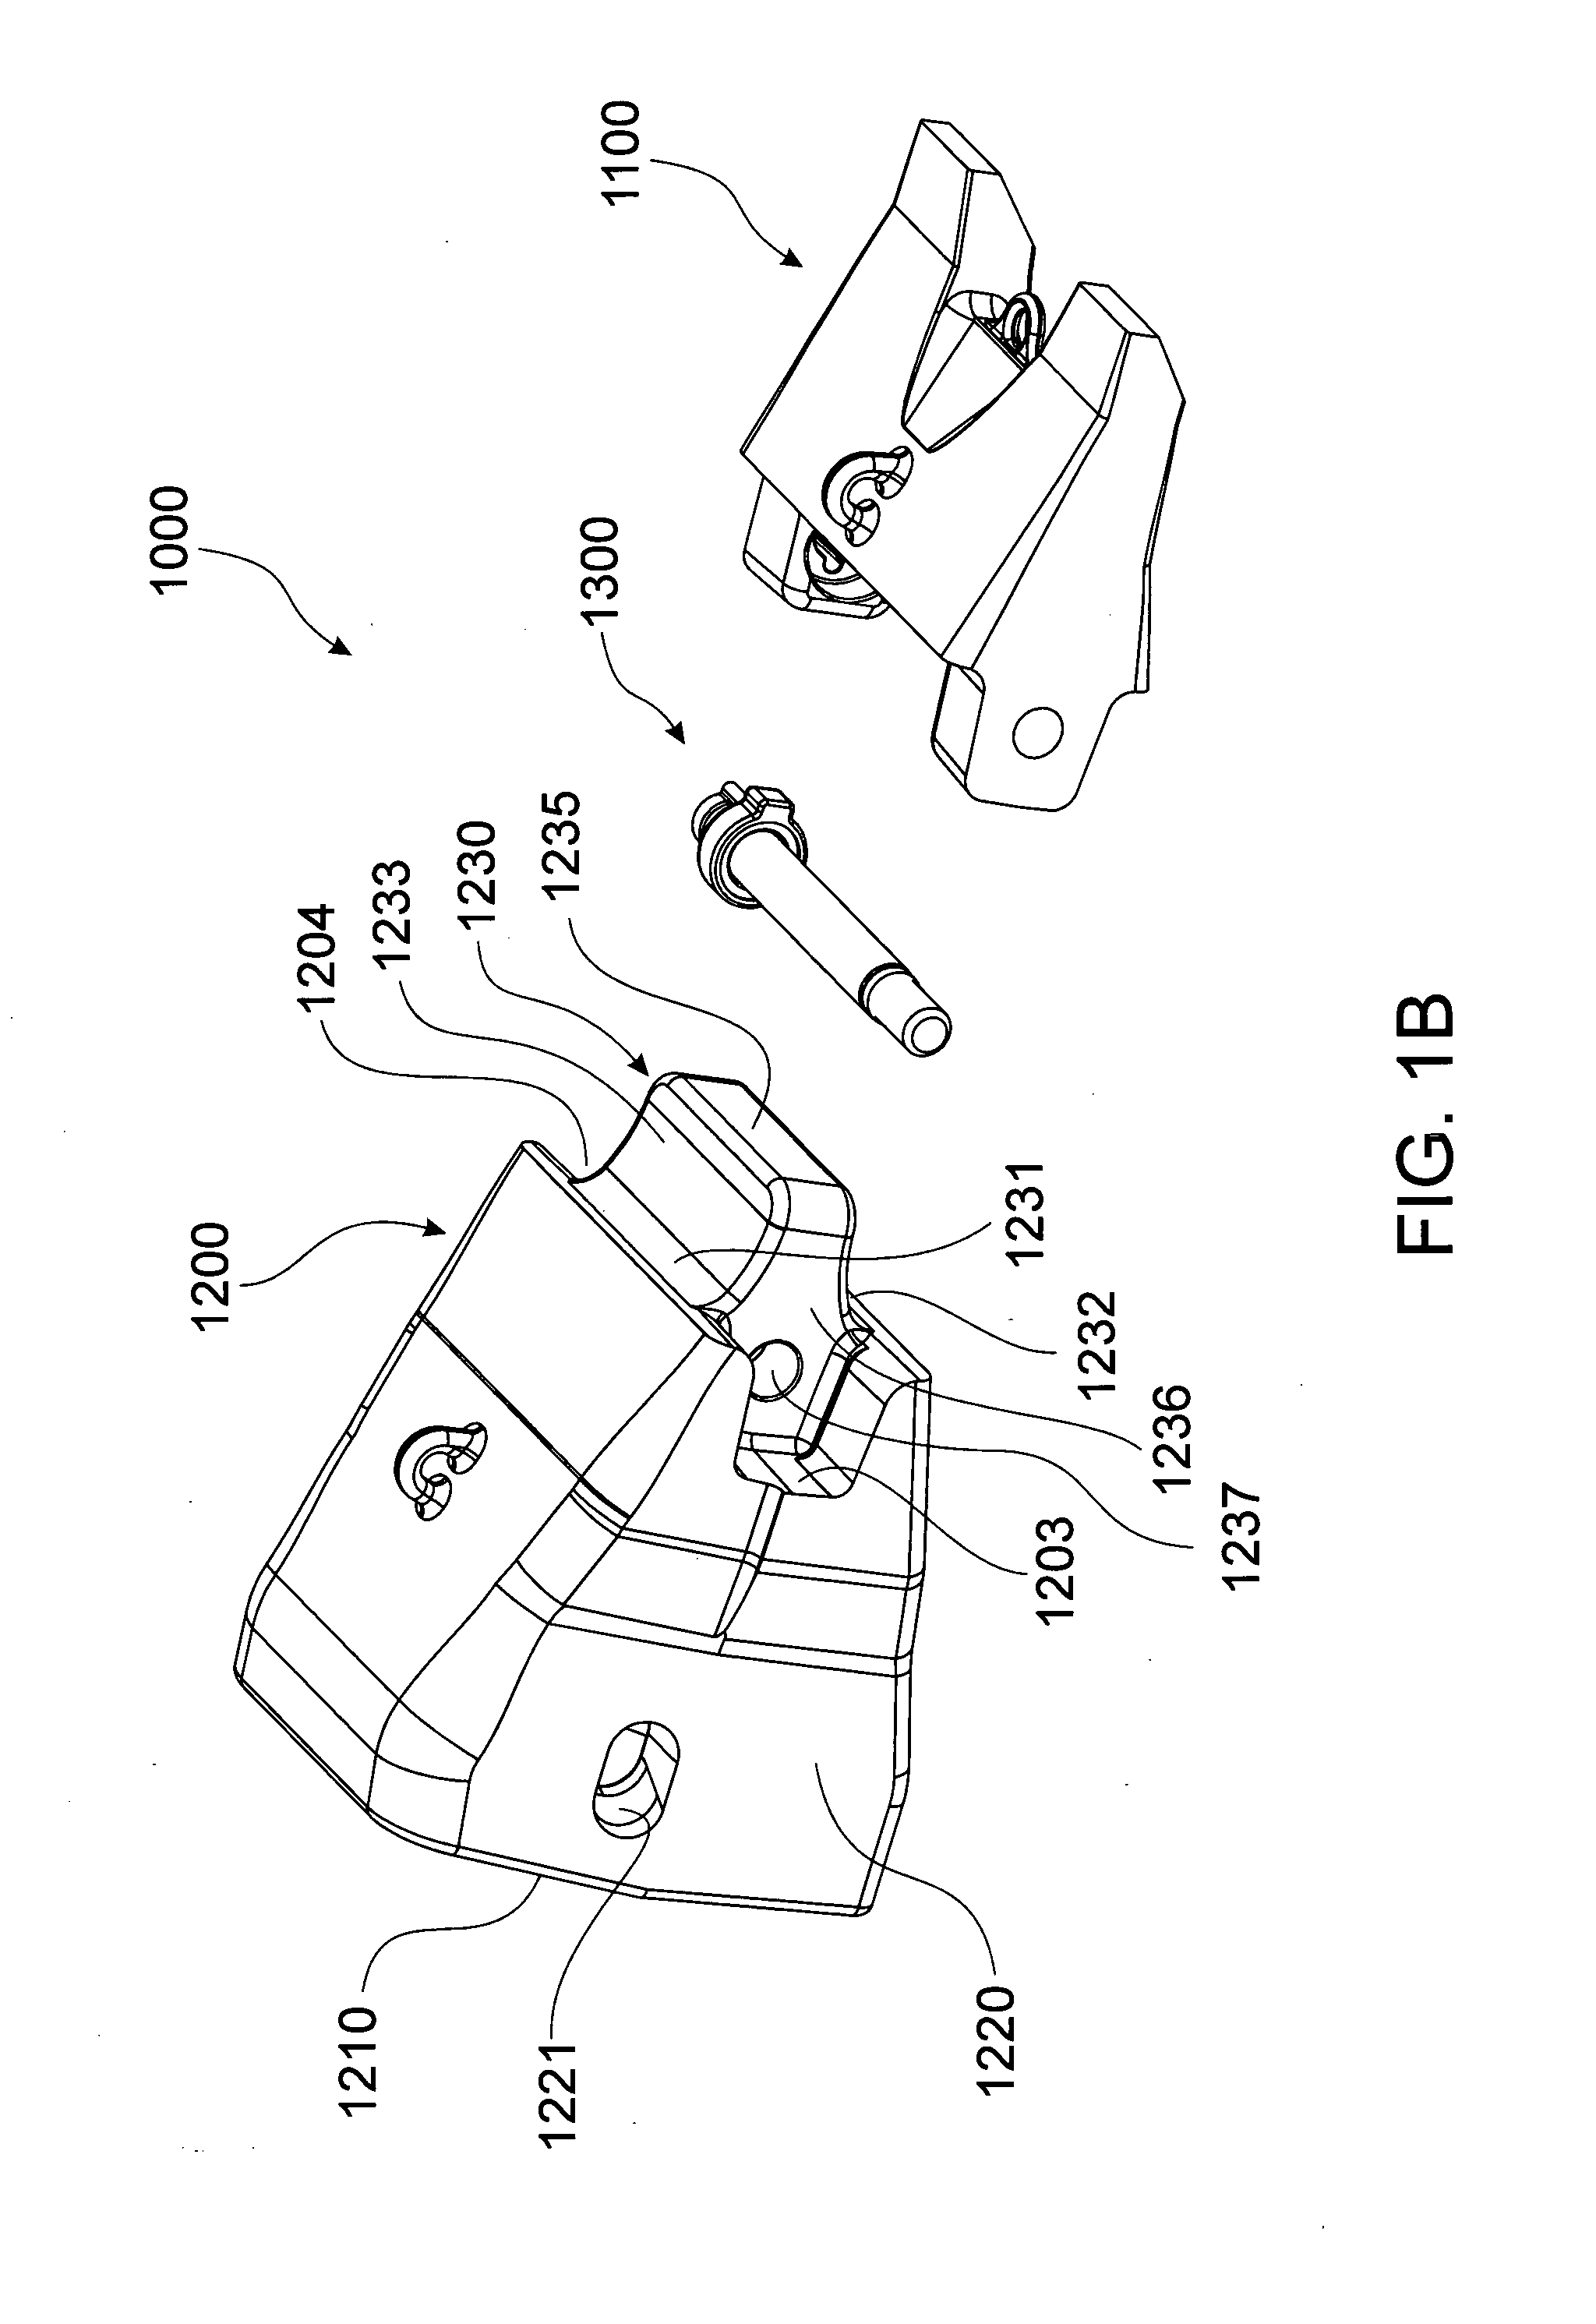 Excavator wear assembly